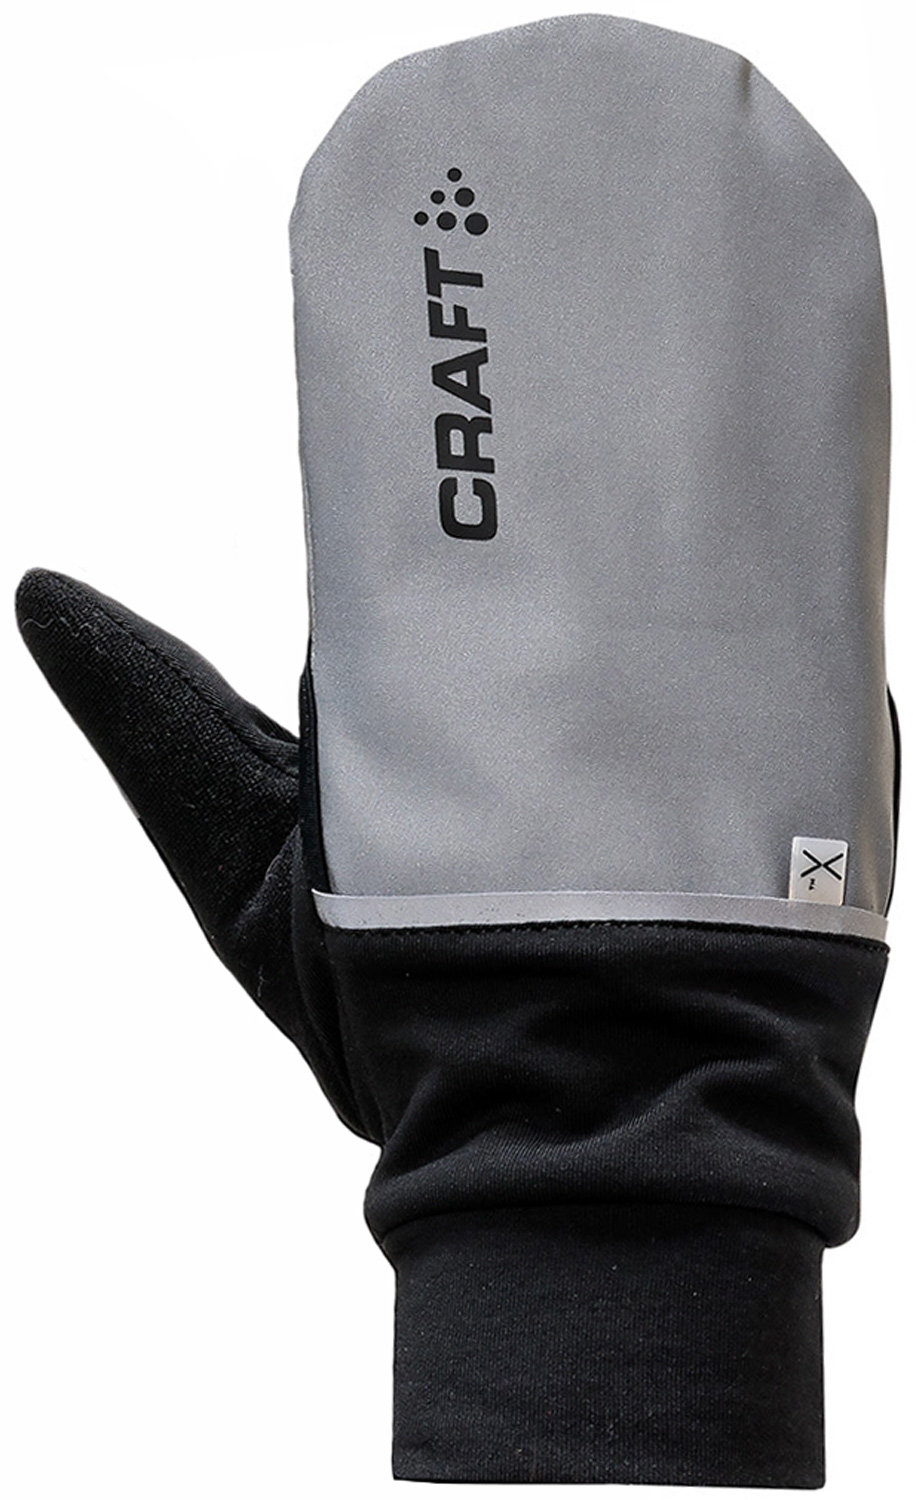 Combi cycling gloves